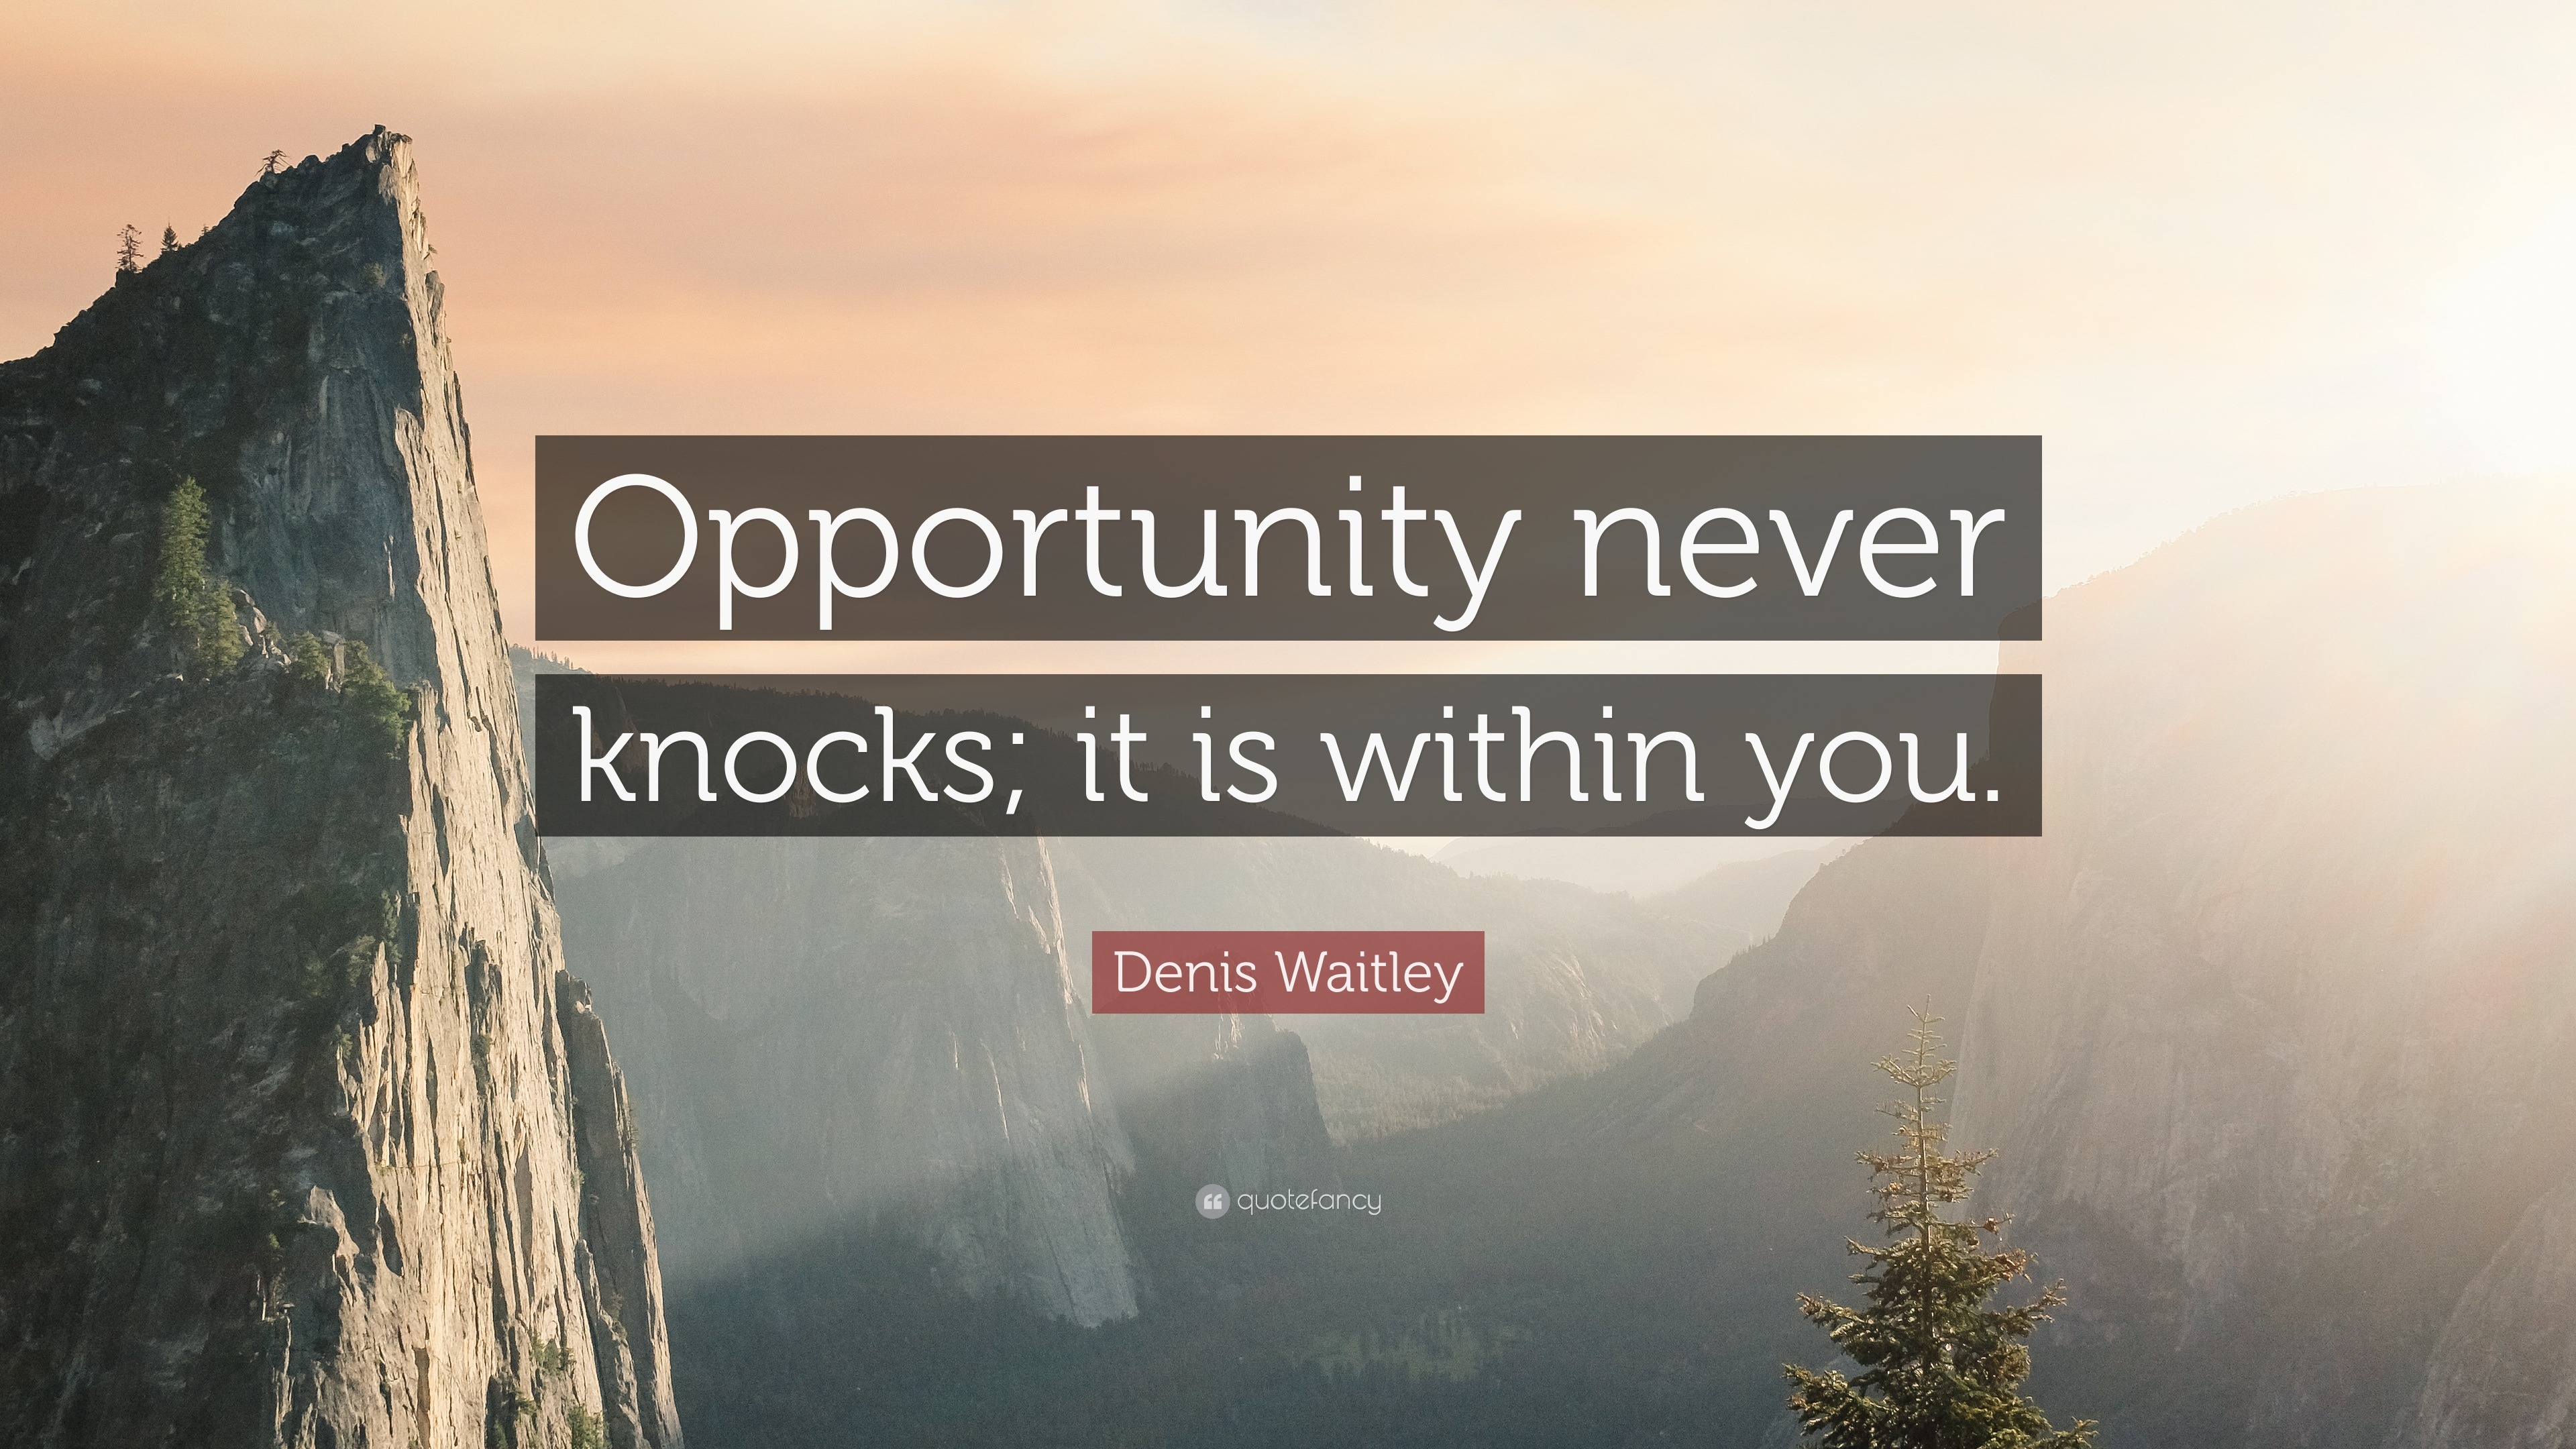 Denis Waitley Quote: "Opportunity never knocks; it is within you." (7 wallpapers) - Quotefancy